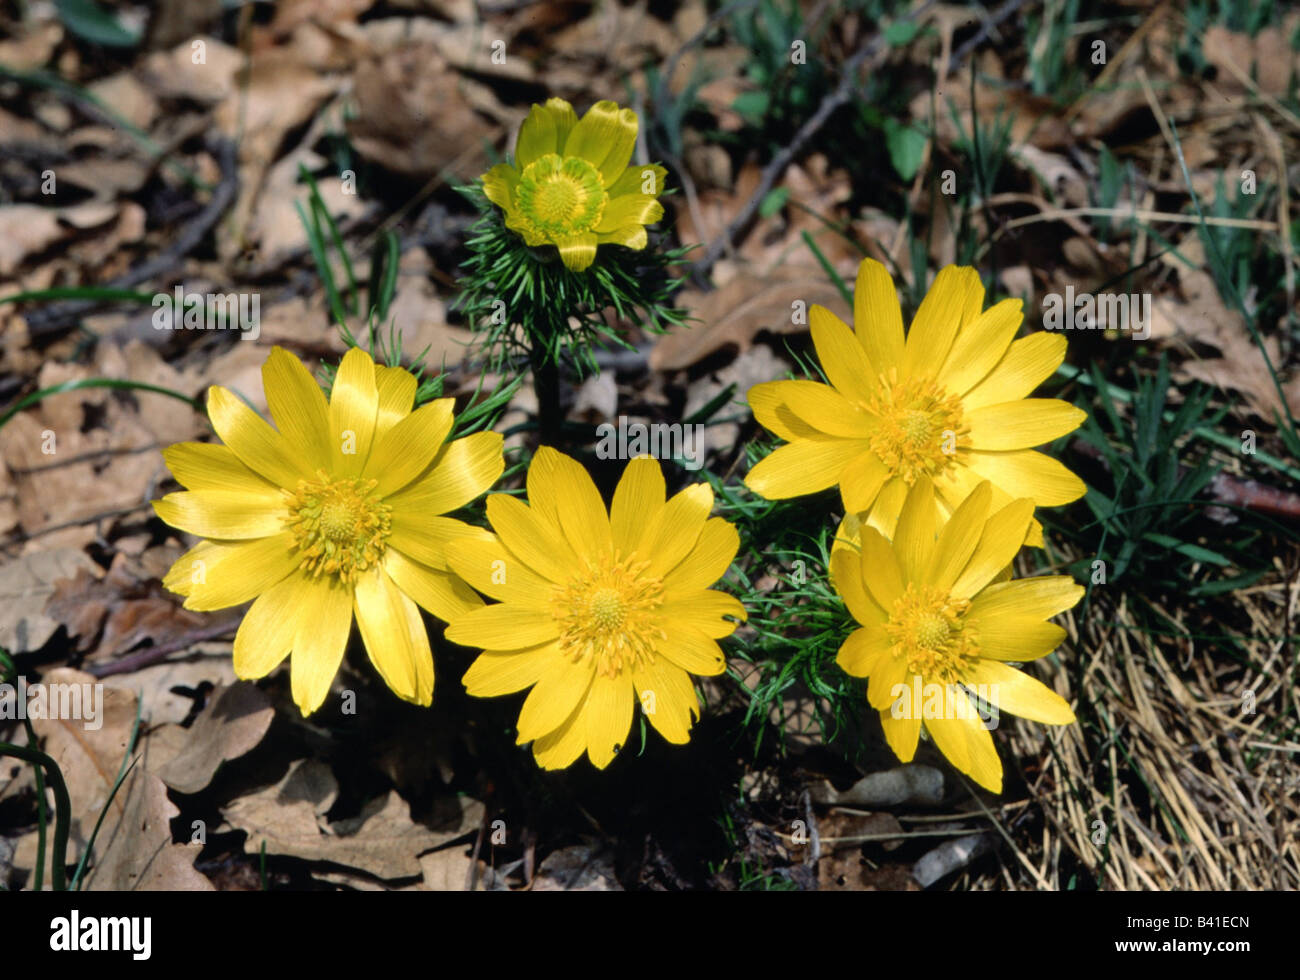 botany, Adonis, (Adonis), Adonis vernalis, (Adonis vernalis), shoot with blossoms, blooming, flowering, yellow, growing, on grou Stock Photo